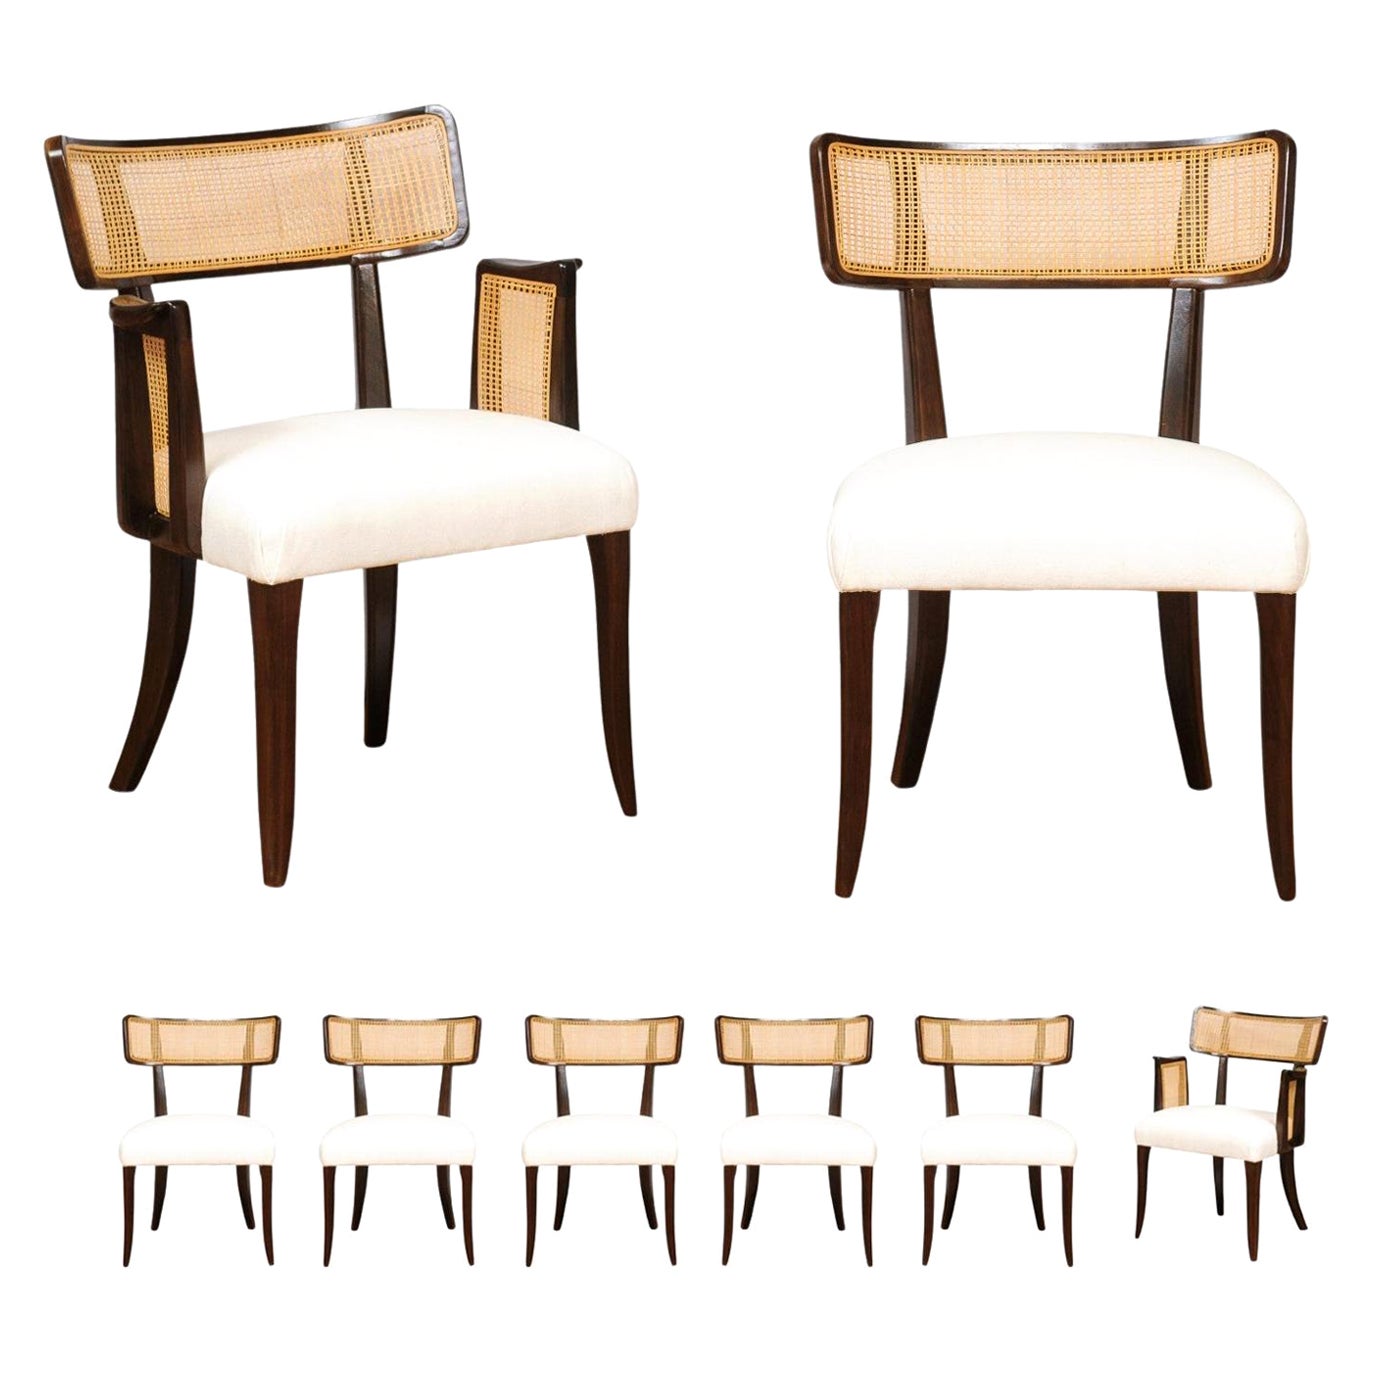 Gorgeous Restored Set of 8 Cane Dining Chairs by Wormley for Dunbar, circa 1948 For Sale